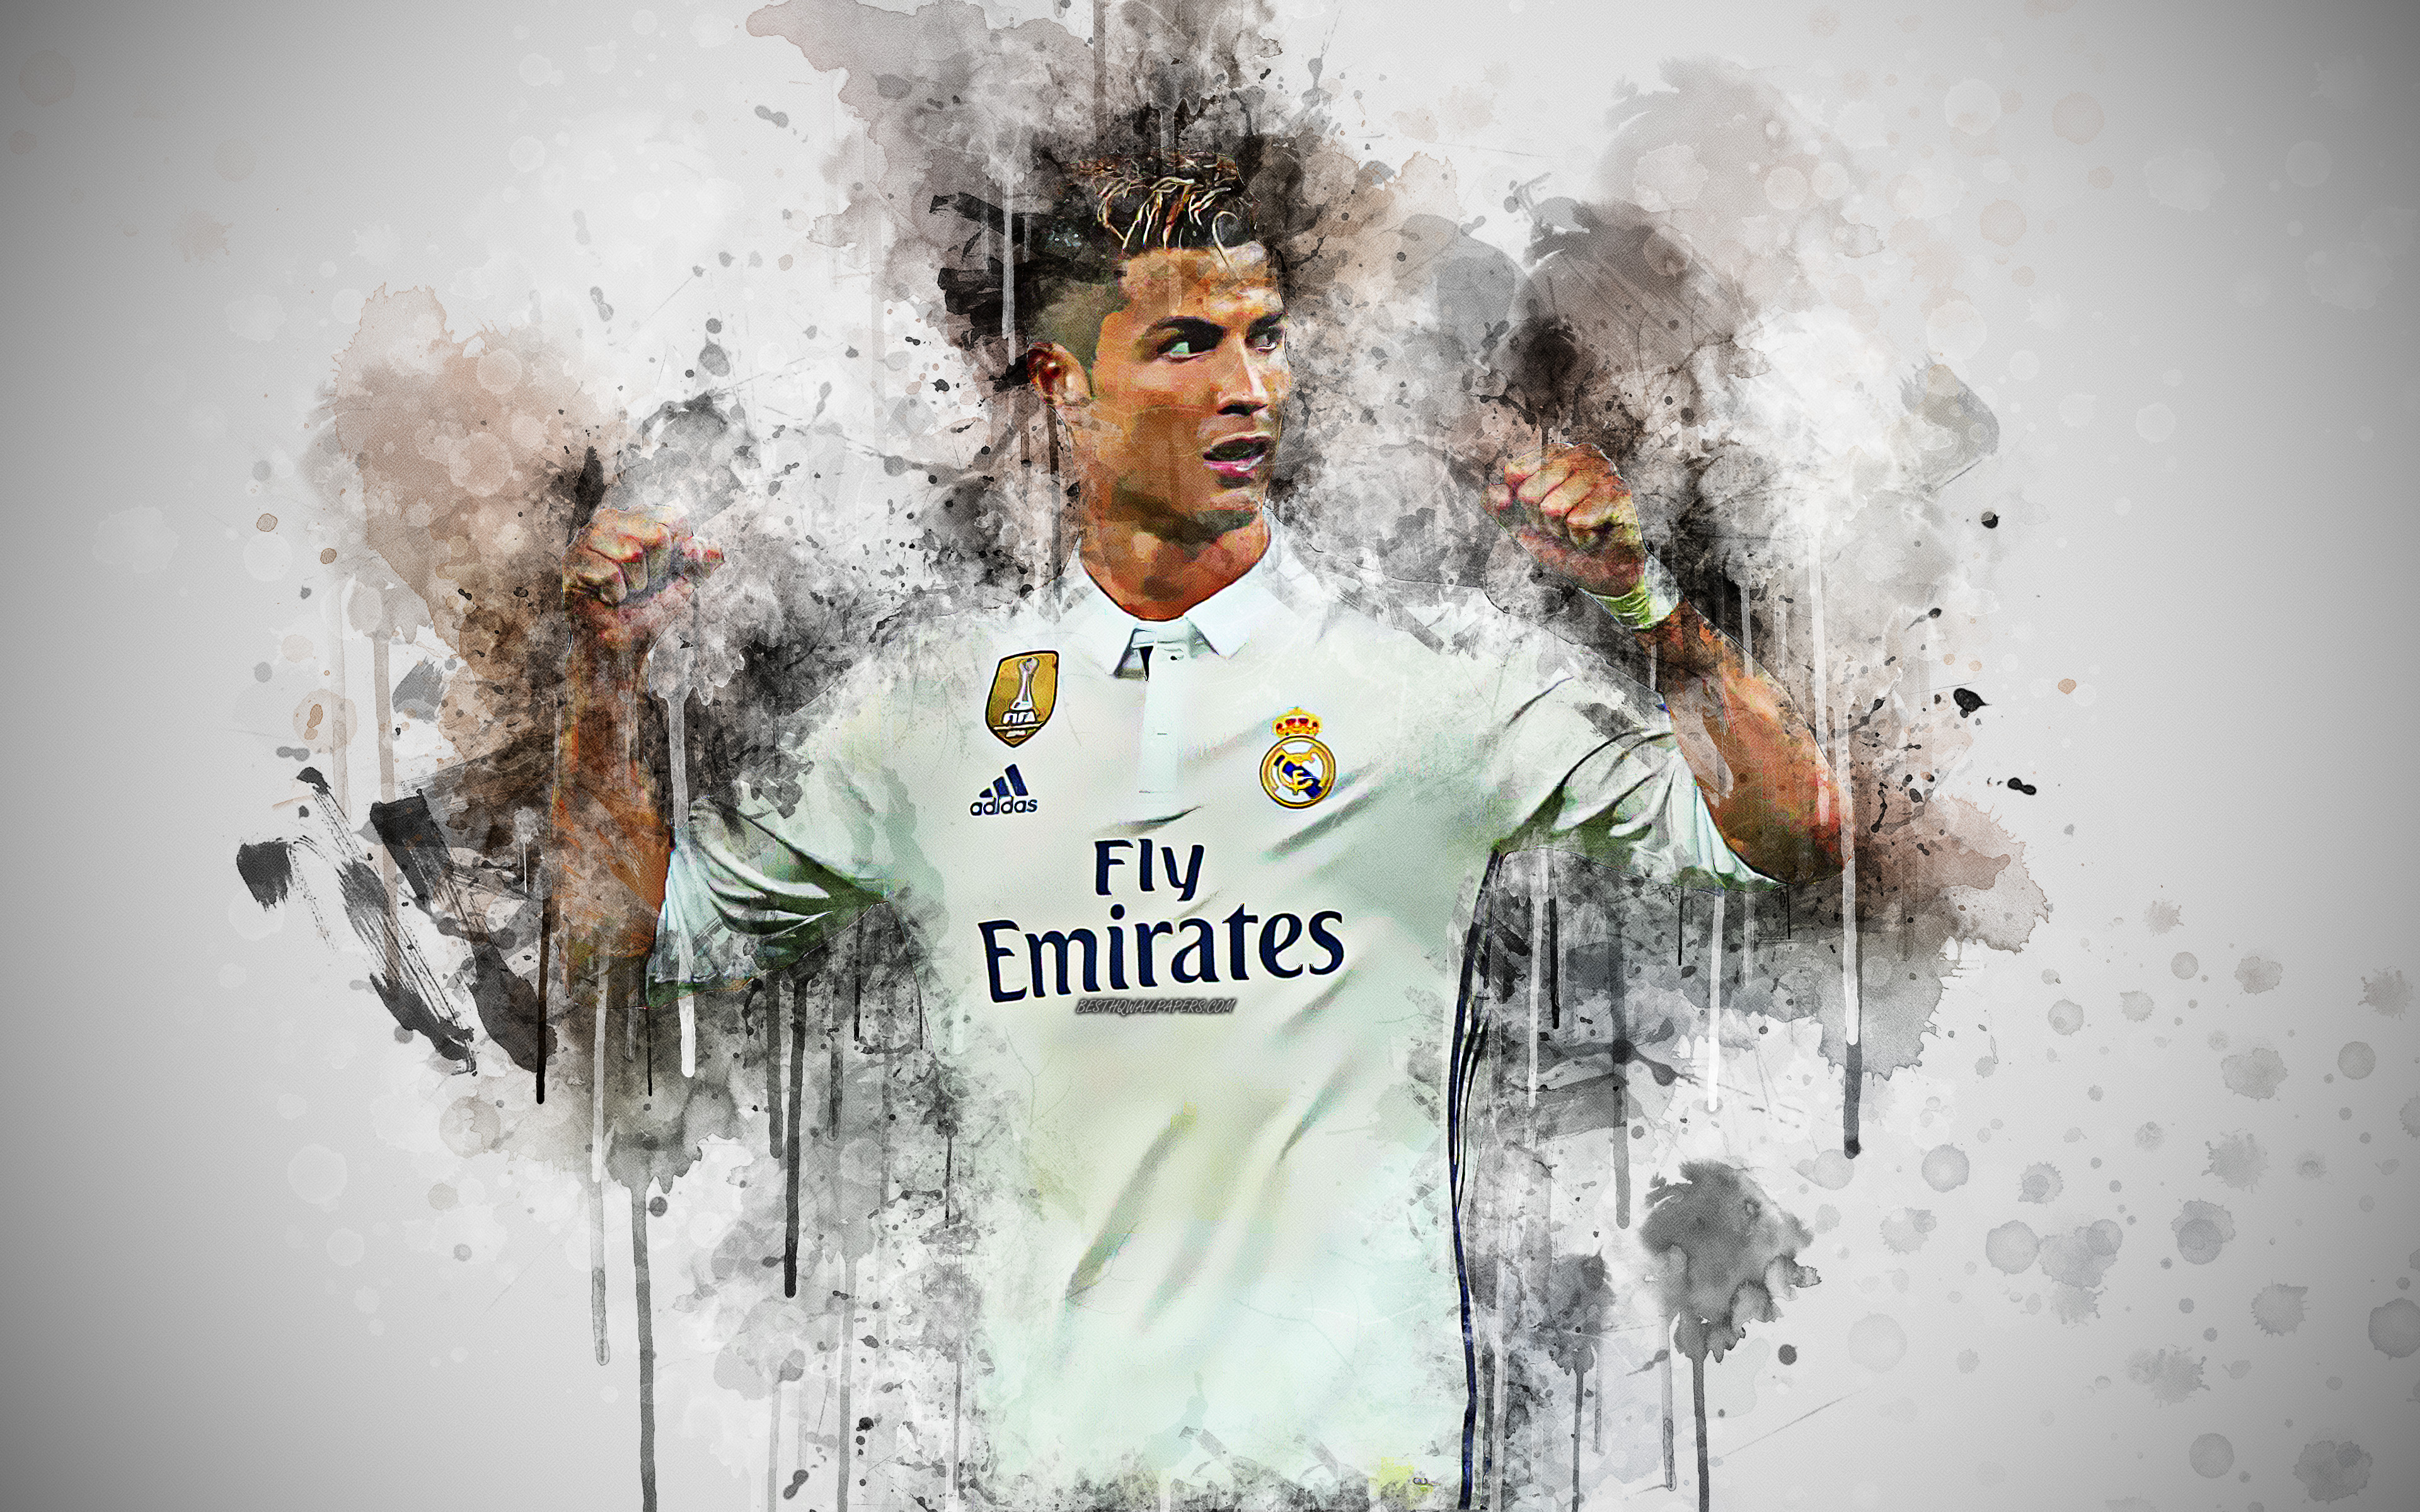 Download wallpaper Cristiano Ronaldo, 4k, Portuguese footballer, face, art, creative portrait, bright colorful splashes, paint art, white grunge background, Real Madrid, La Liga, Spain, football for desktop with resolution 3840x2400. High Quality